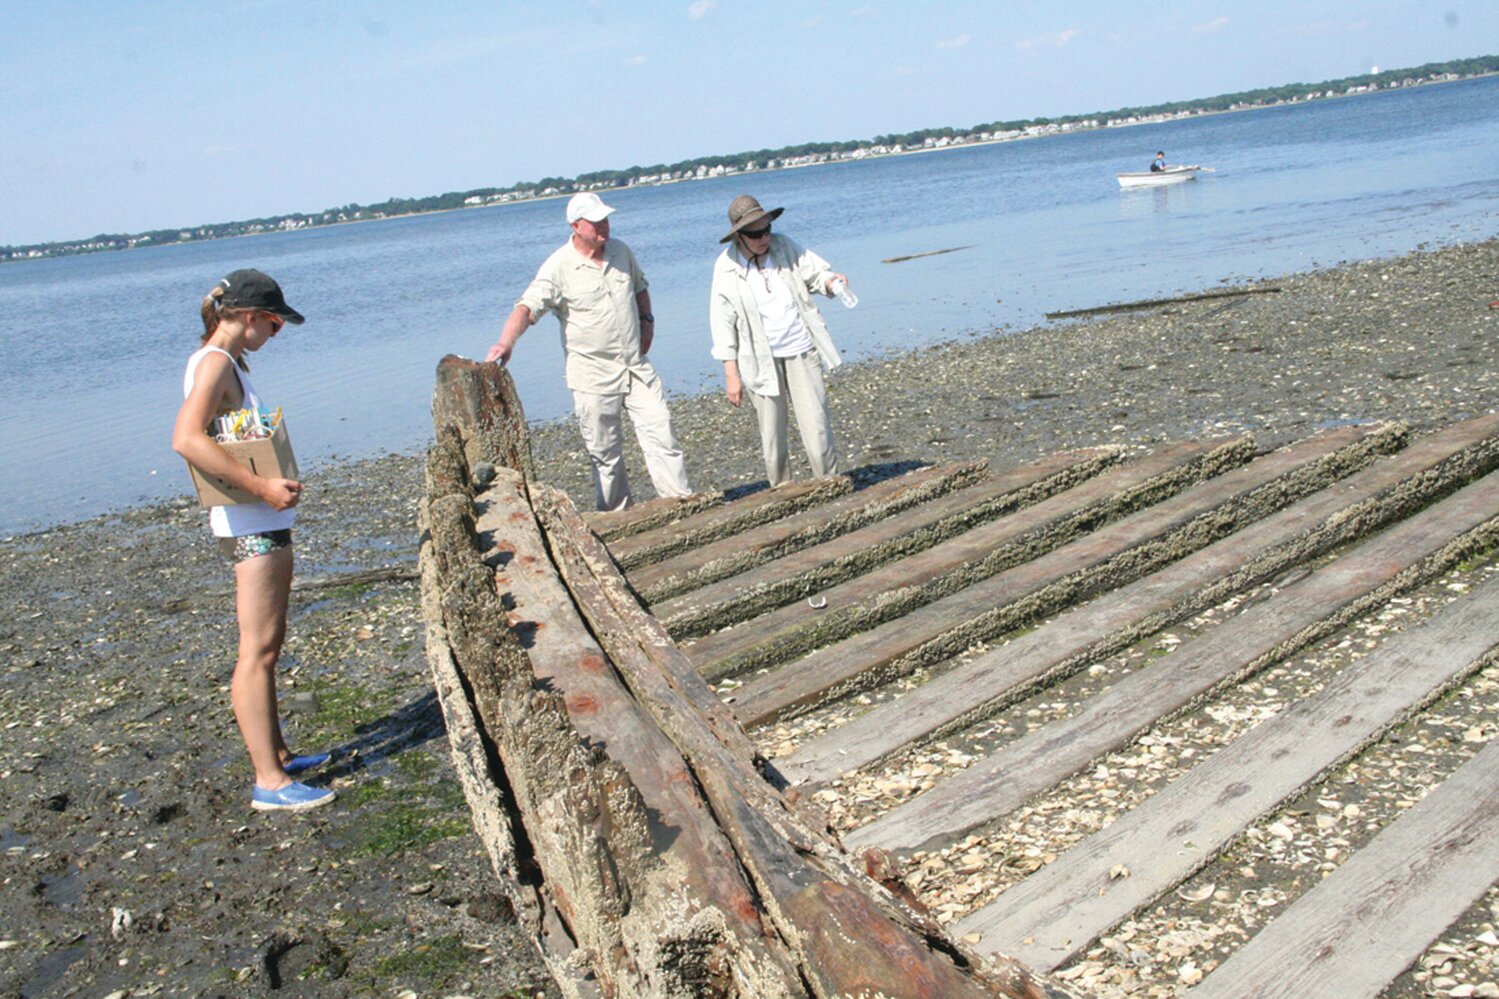 LESS THAN THERE WAS LAST YEAR: Rep. Joseph McNamara and Dr. Kathy Abbass confer near the bow of the wreck that is starting to break up with exposure from its sandy grave.